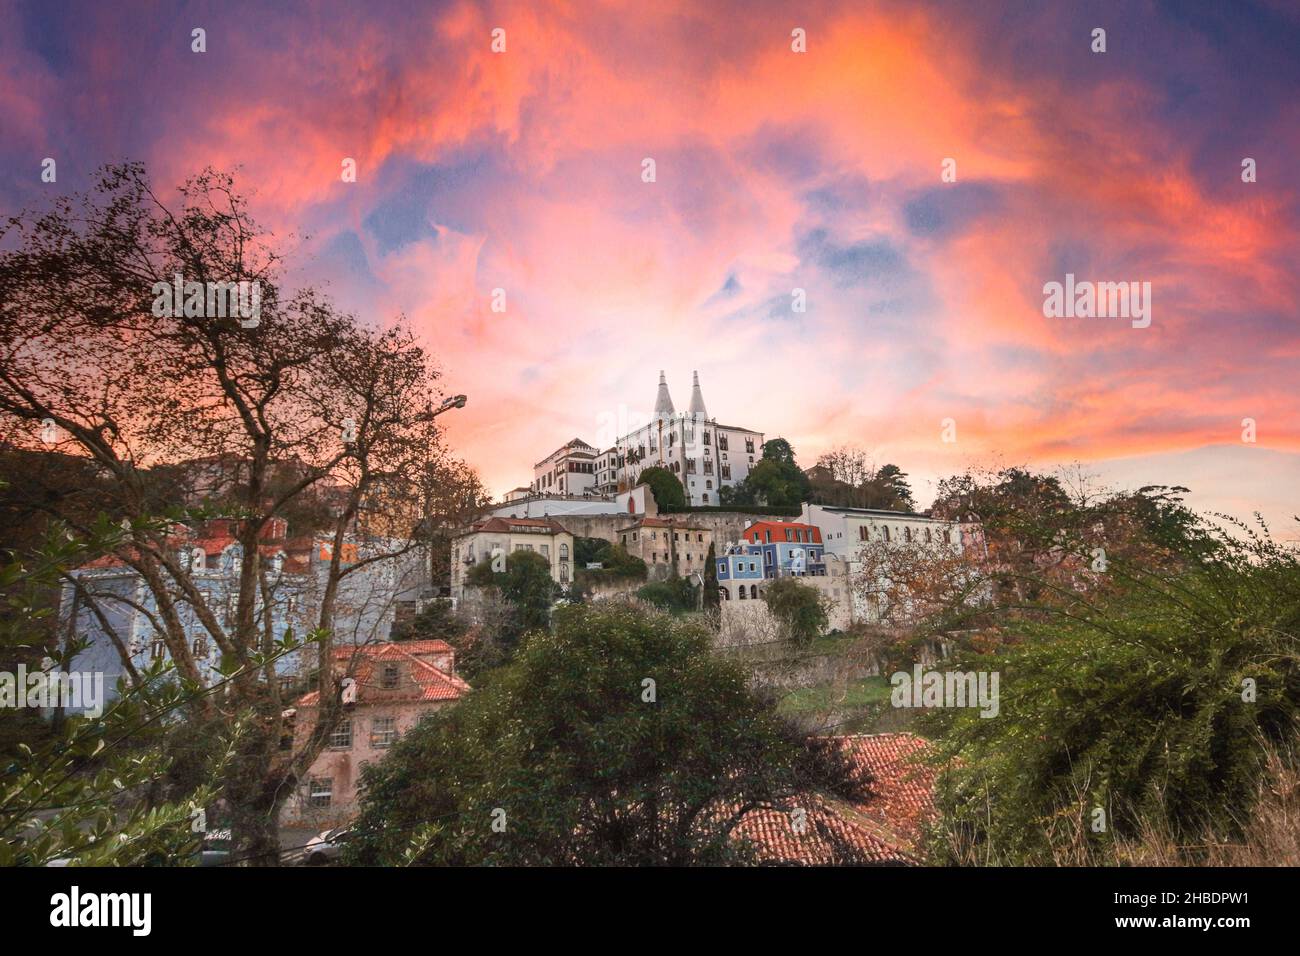 Portuguese village of Sintra, a UNESCO World Heritage Site. Sintra National Palace in the background. Sintra, Portugal. Stock Photo